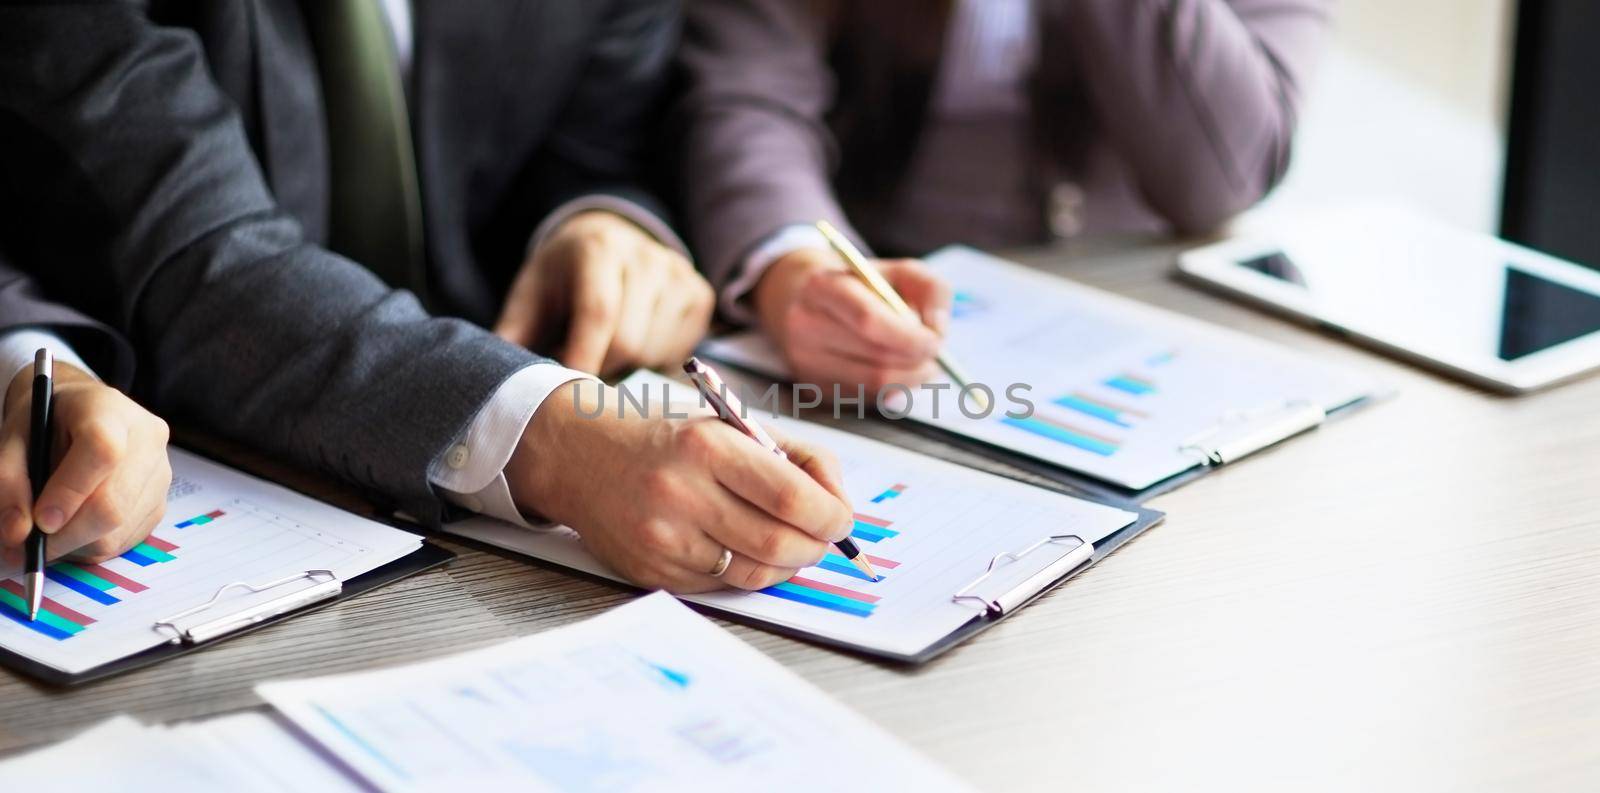 Banking business or financial analyst desktop accounting charts, pens indicates graphics